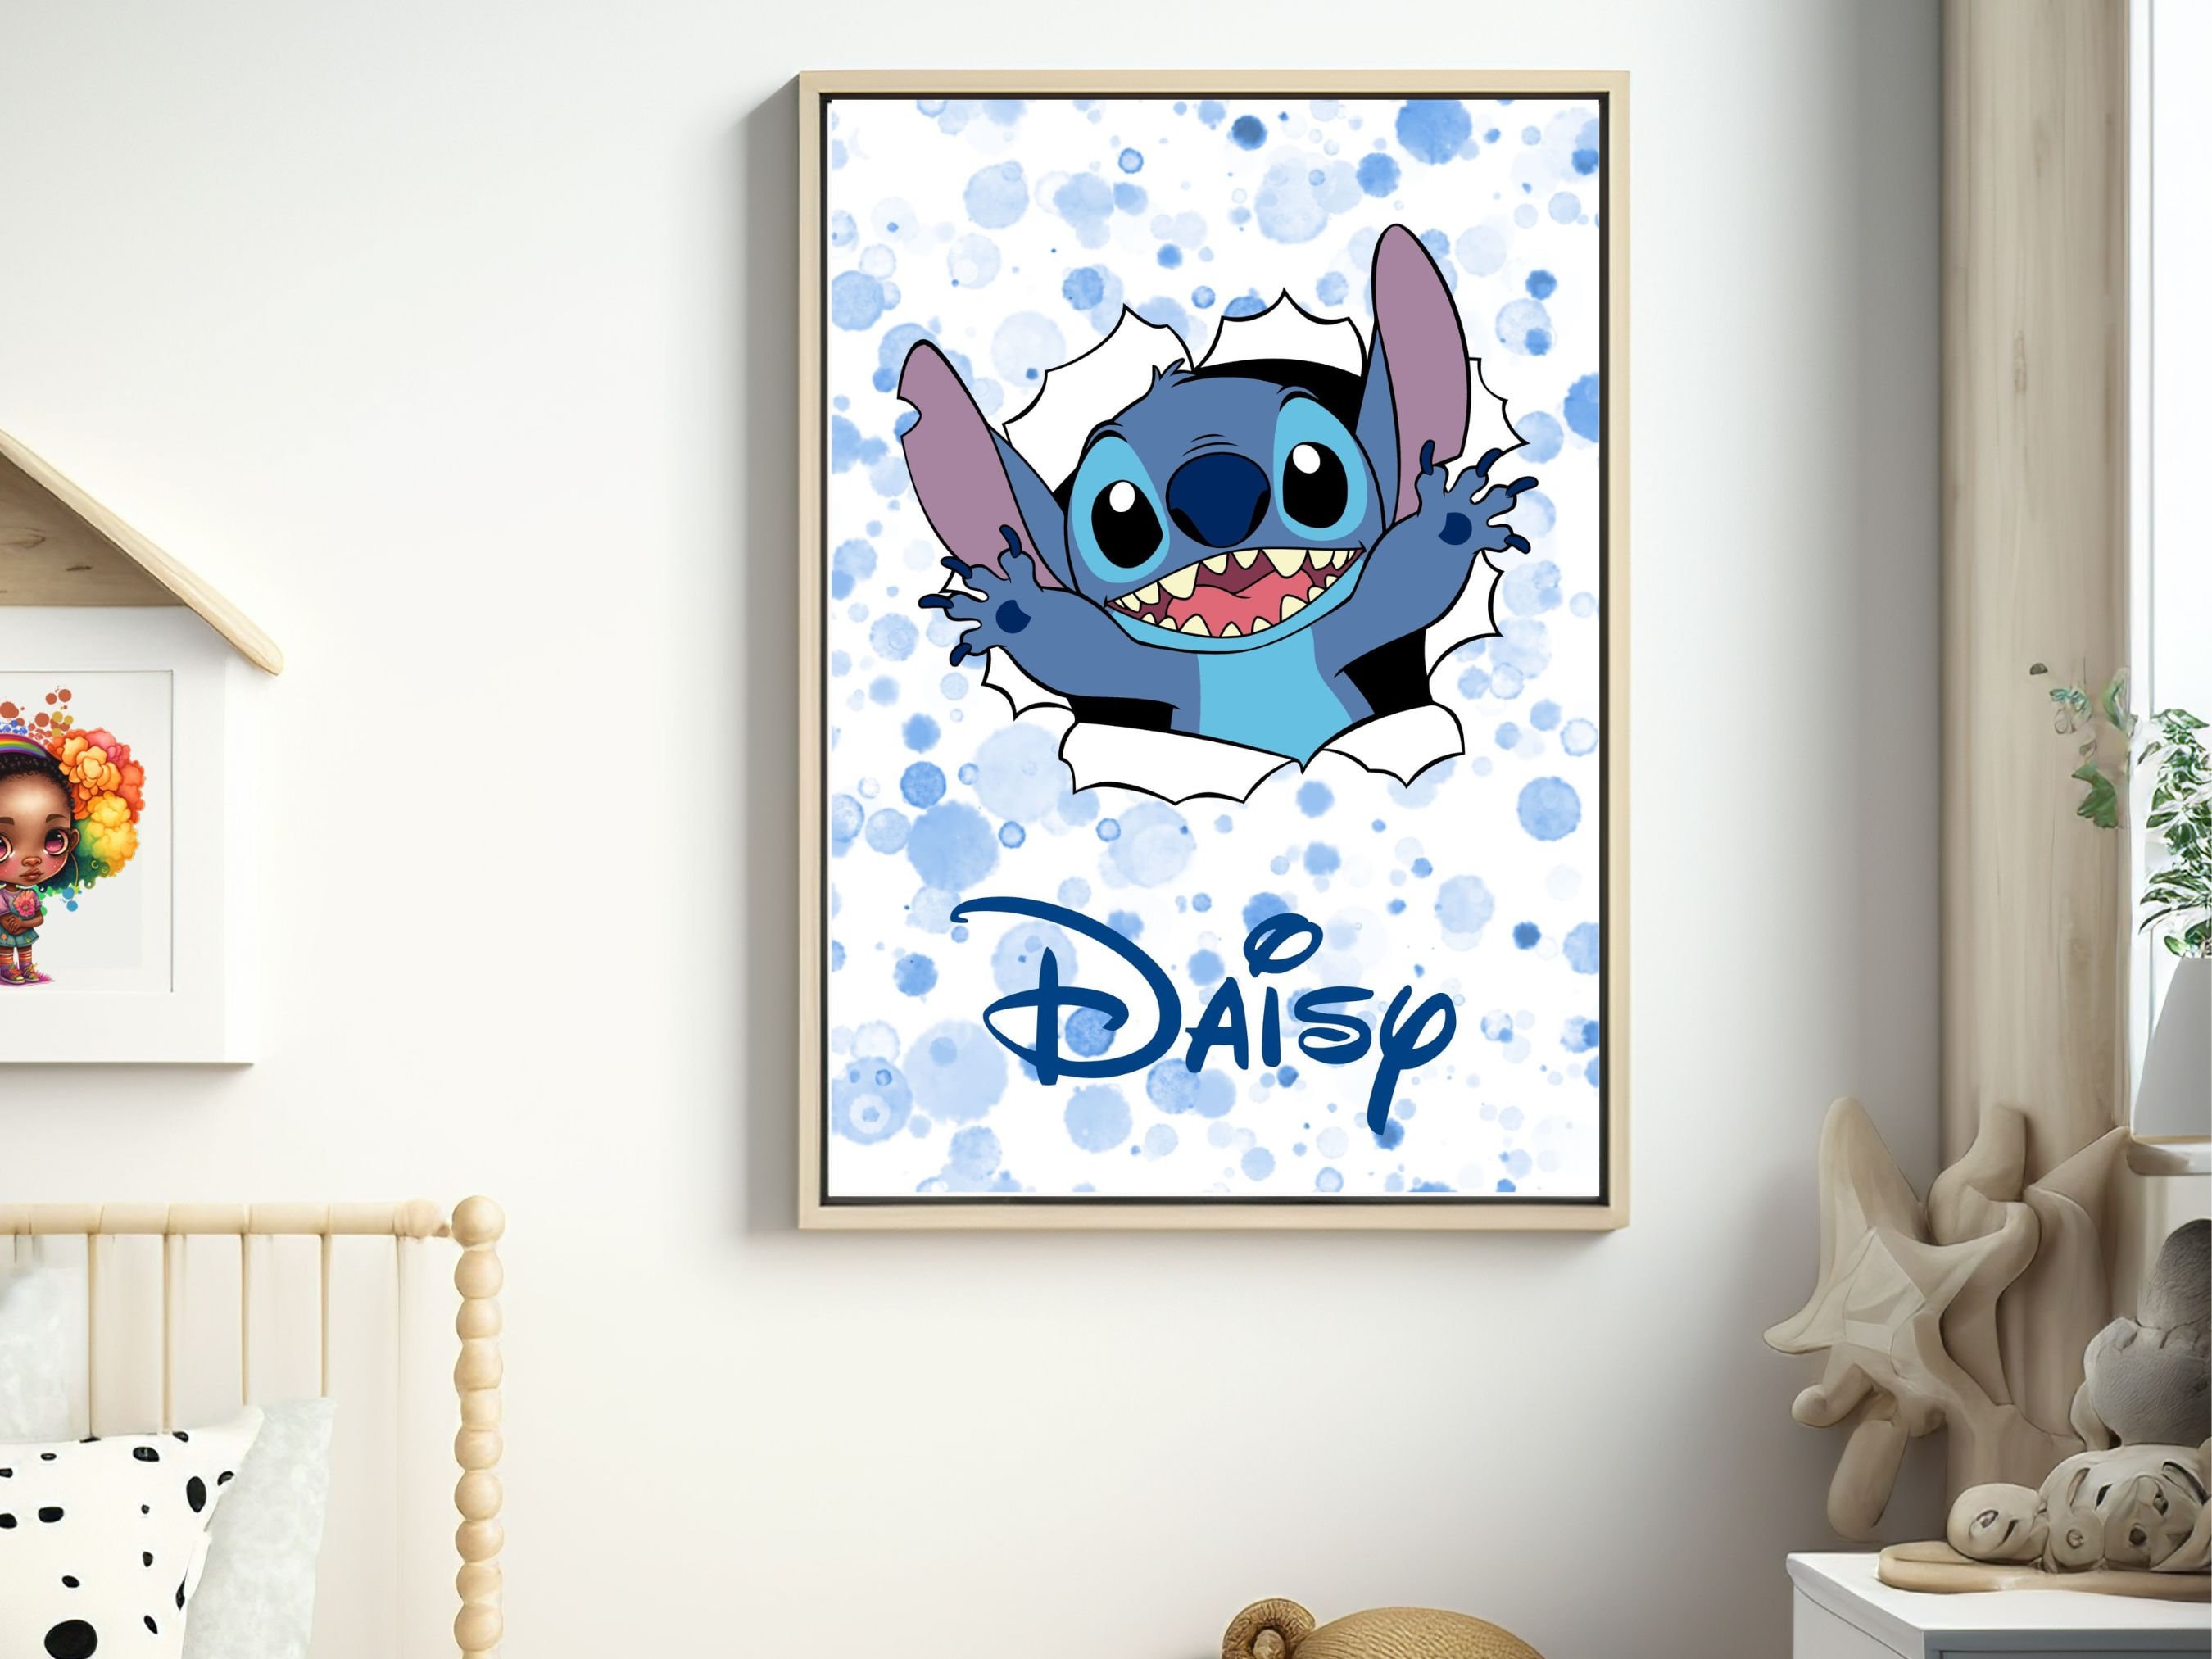 Tapestry Stitch Cartoon Wall Tapestry for Bedroom Aesthetic Lilo & Stitch  Printed Custom Fantastic Tapestry With Nails and Clips Cute Hanging cloth